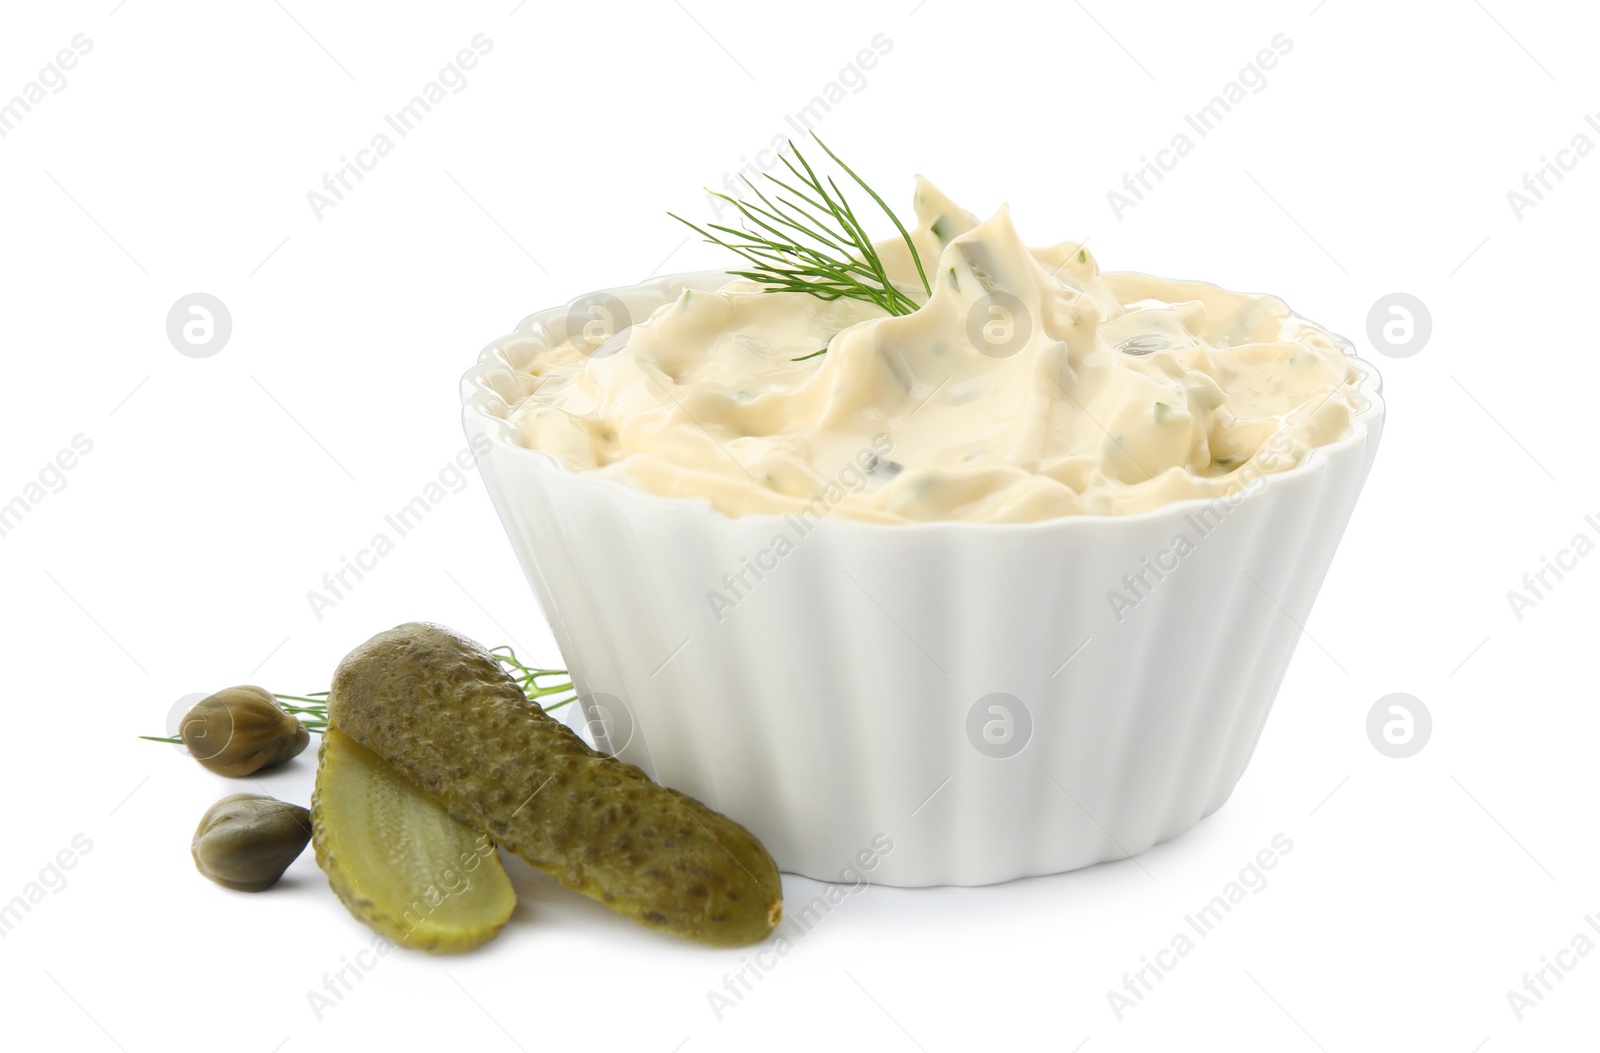 Photo of Tartar sauce and ingredients on white background